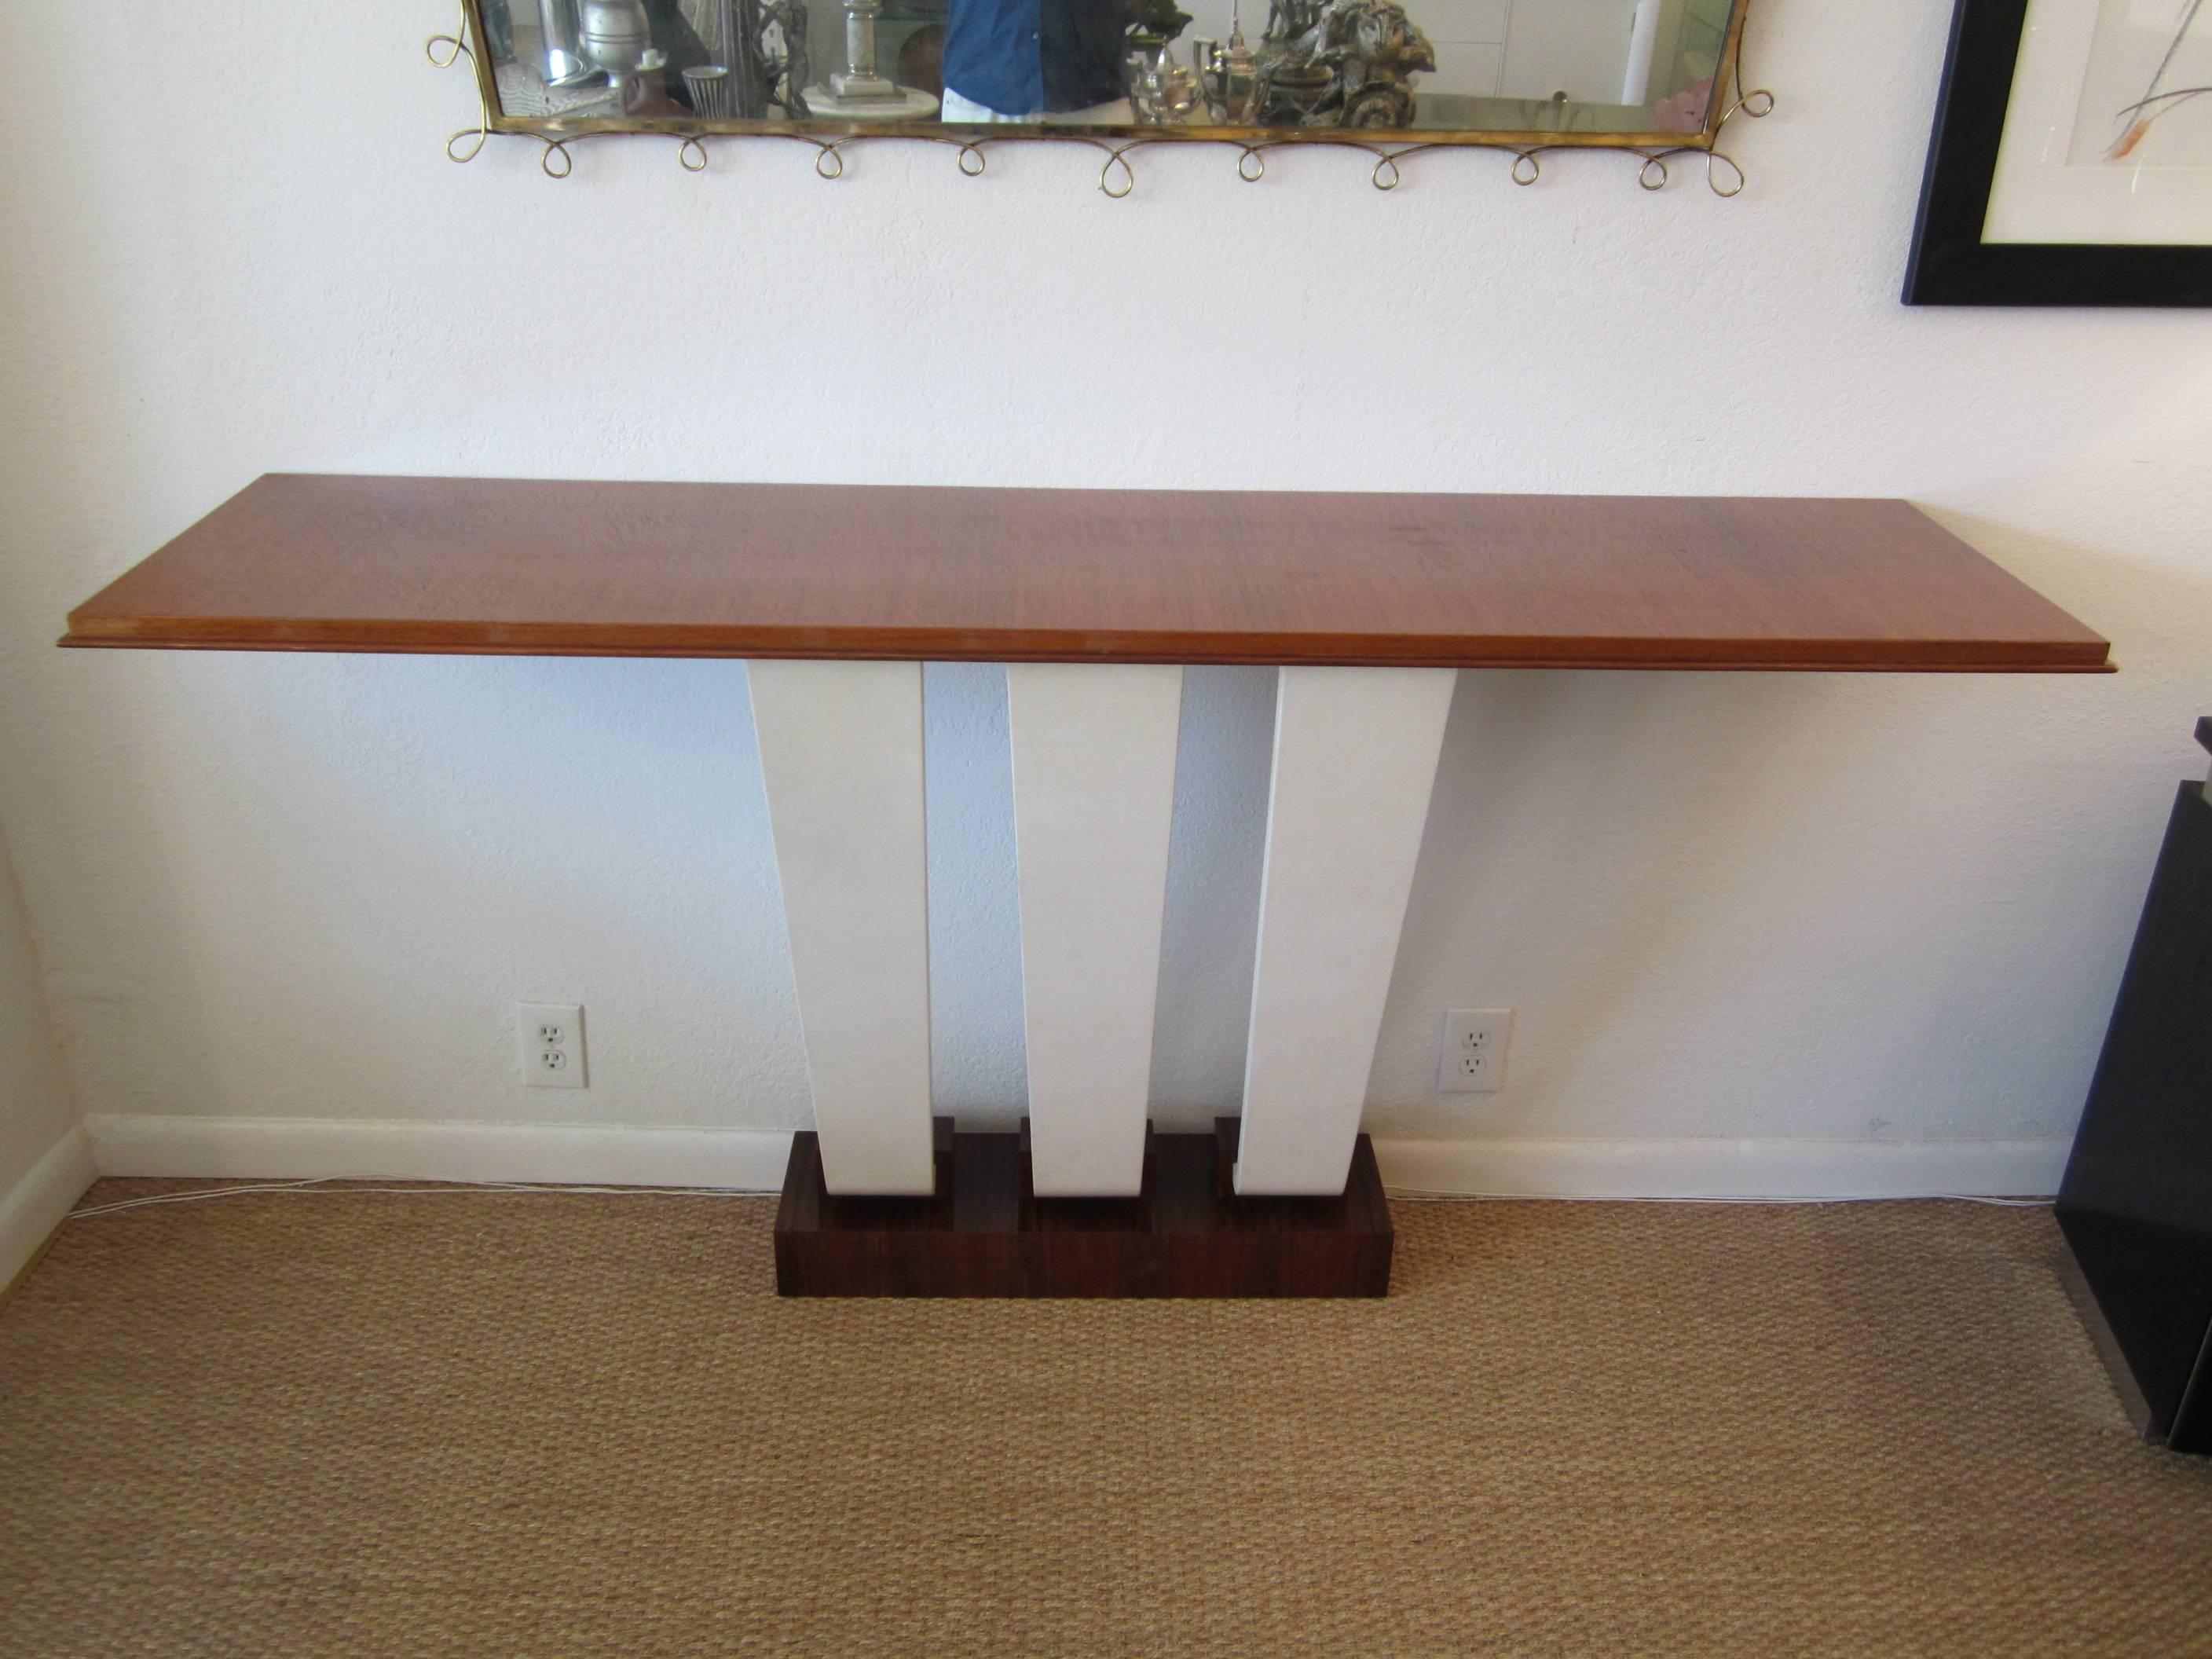 Stunning French Art Deco wall mount console table. The three goatskin covered legs hold the gloss mahogany top and taper inward towards the wall as they go down. Nice thick base in exotic macassar ebony. Small chips on top shelf from natural wear.